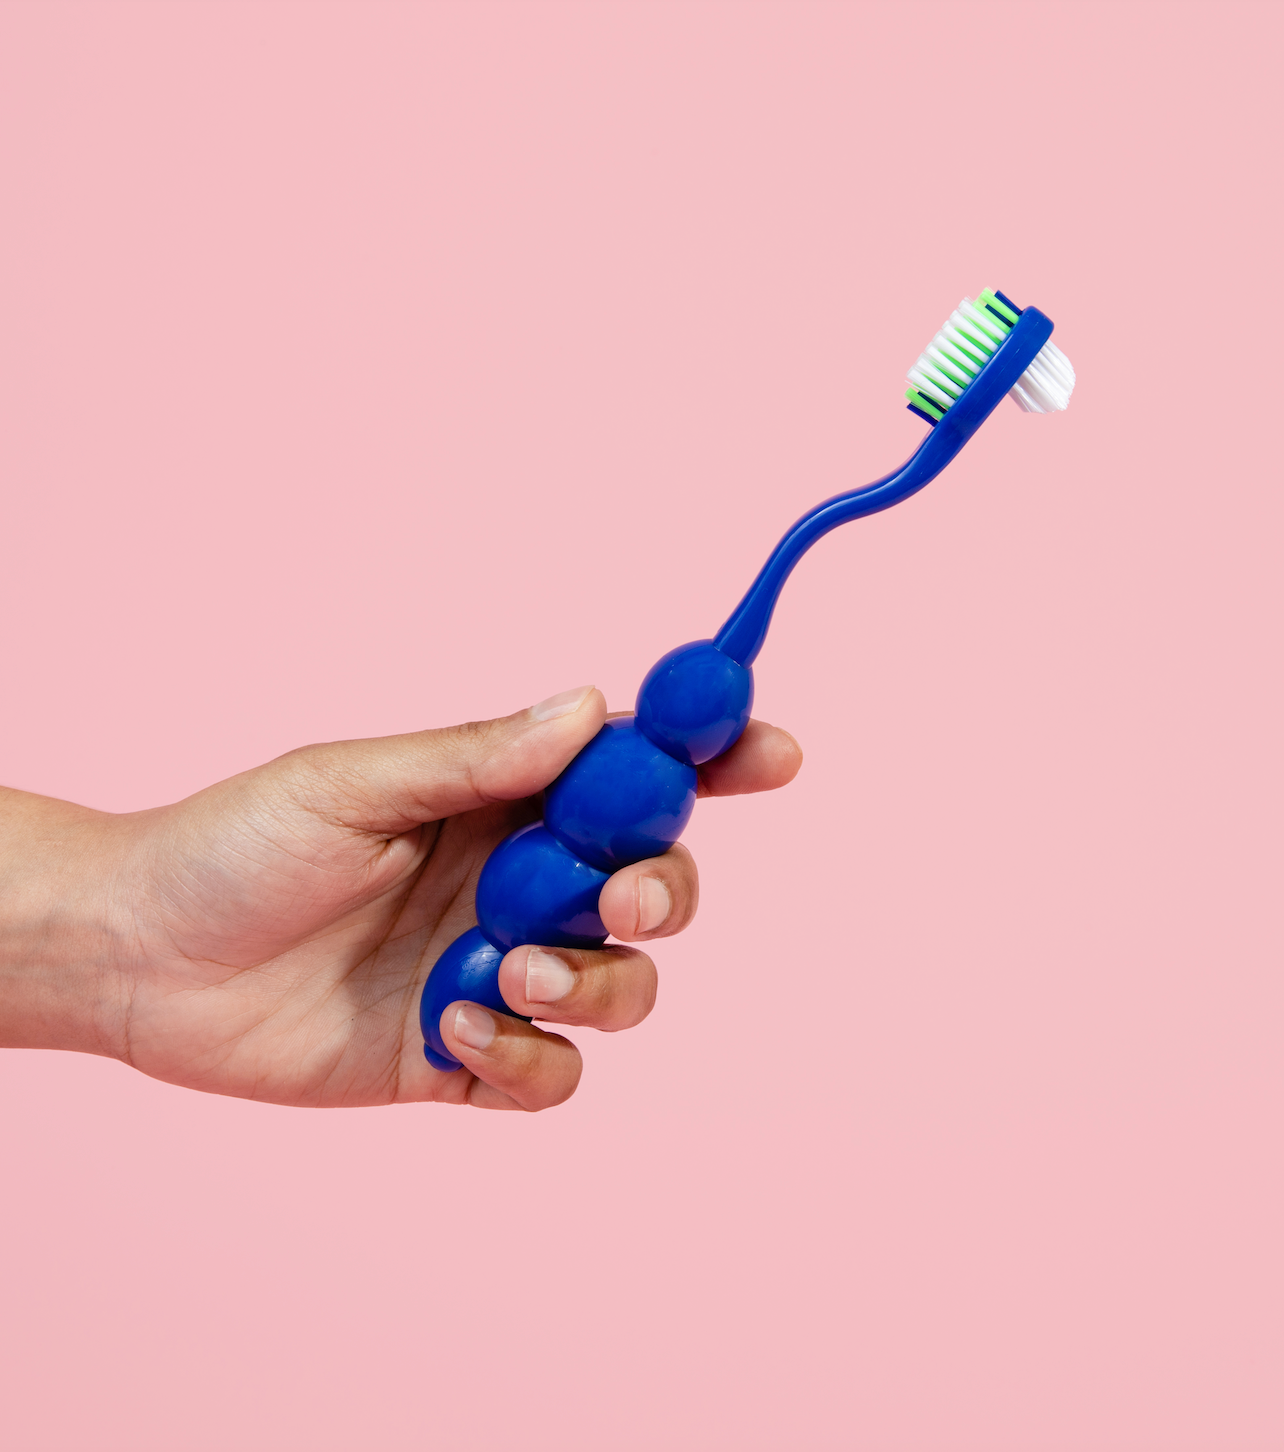  A Denture Brush That Actually Works!